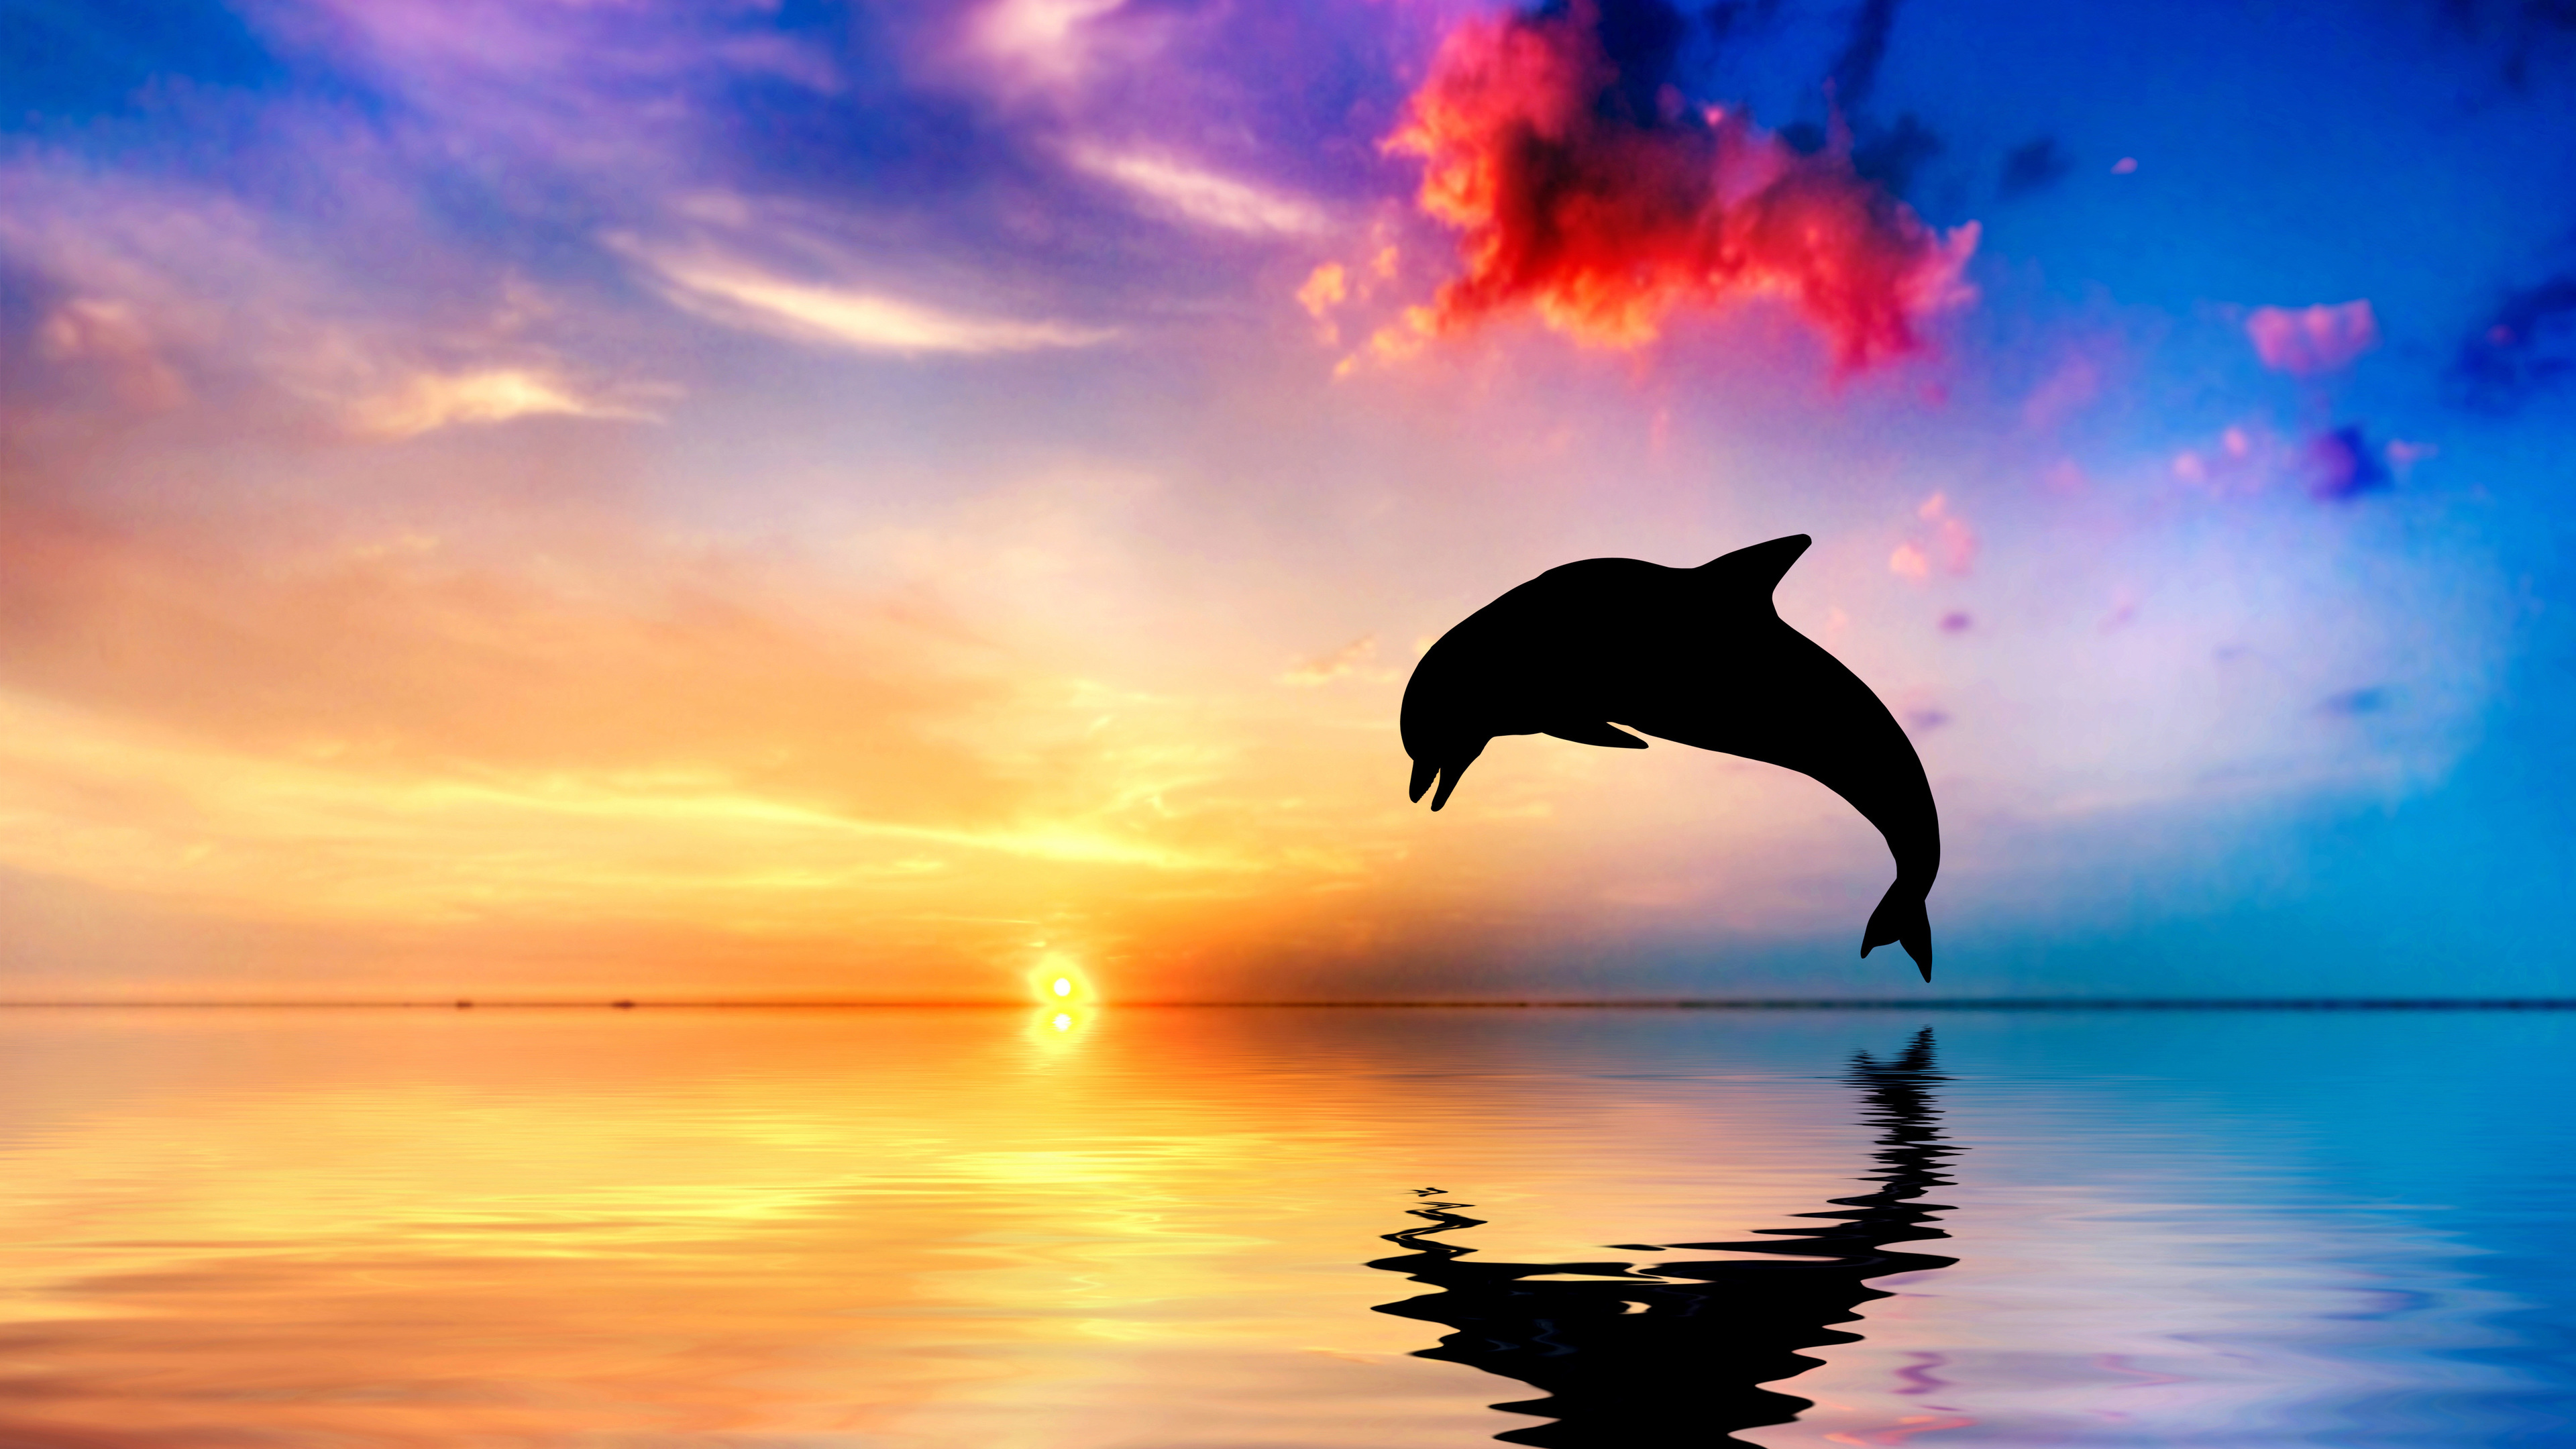 Wallpaper 4k Dolphin Jumping Out Of Water Sunset View 4k Wallpaper